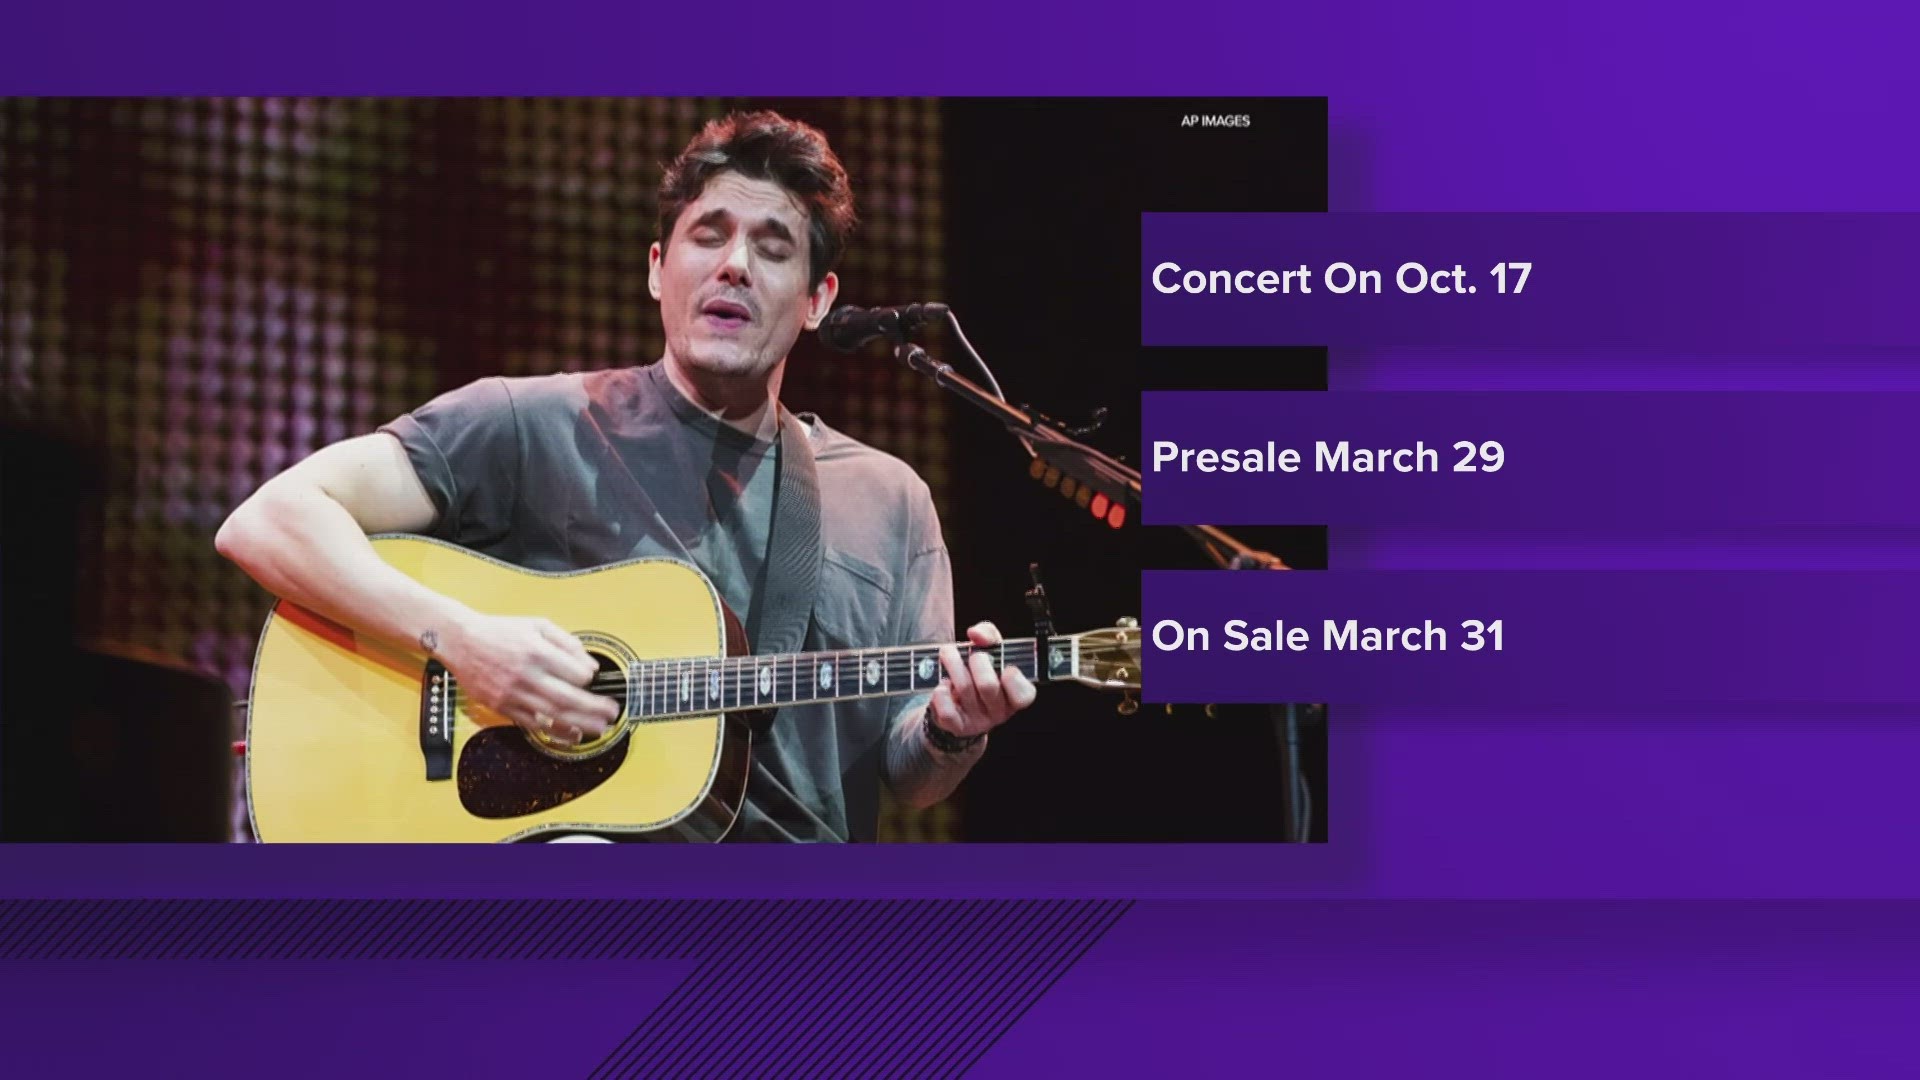 John Mayer added a stop in Indianapolis to his upcoming tour.